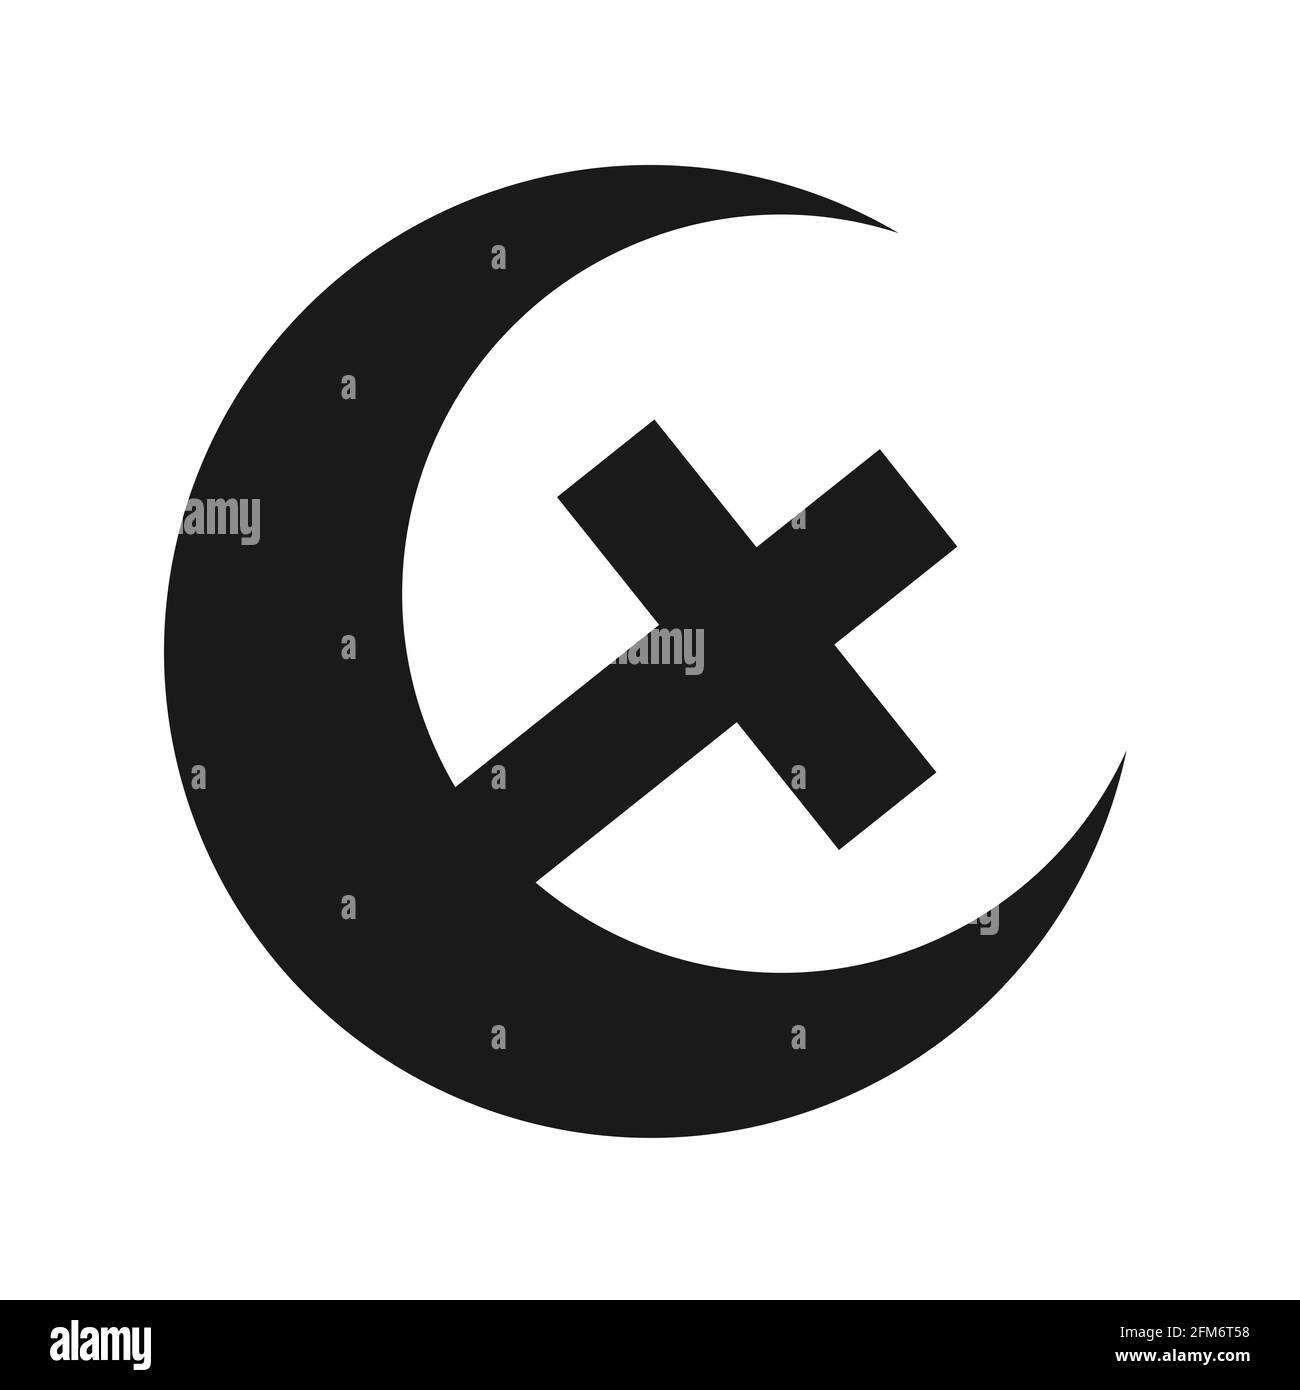 Religious symbol of islam and christianity as one united, joined and connected religion. Vector illustration isolated on white. Stock Photo